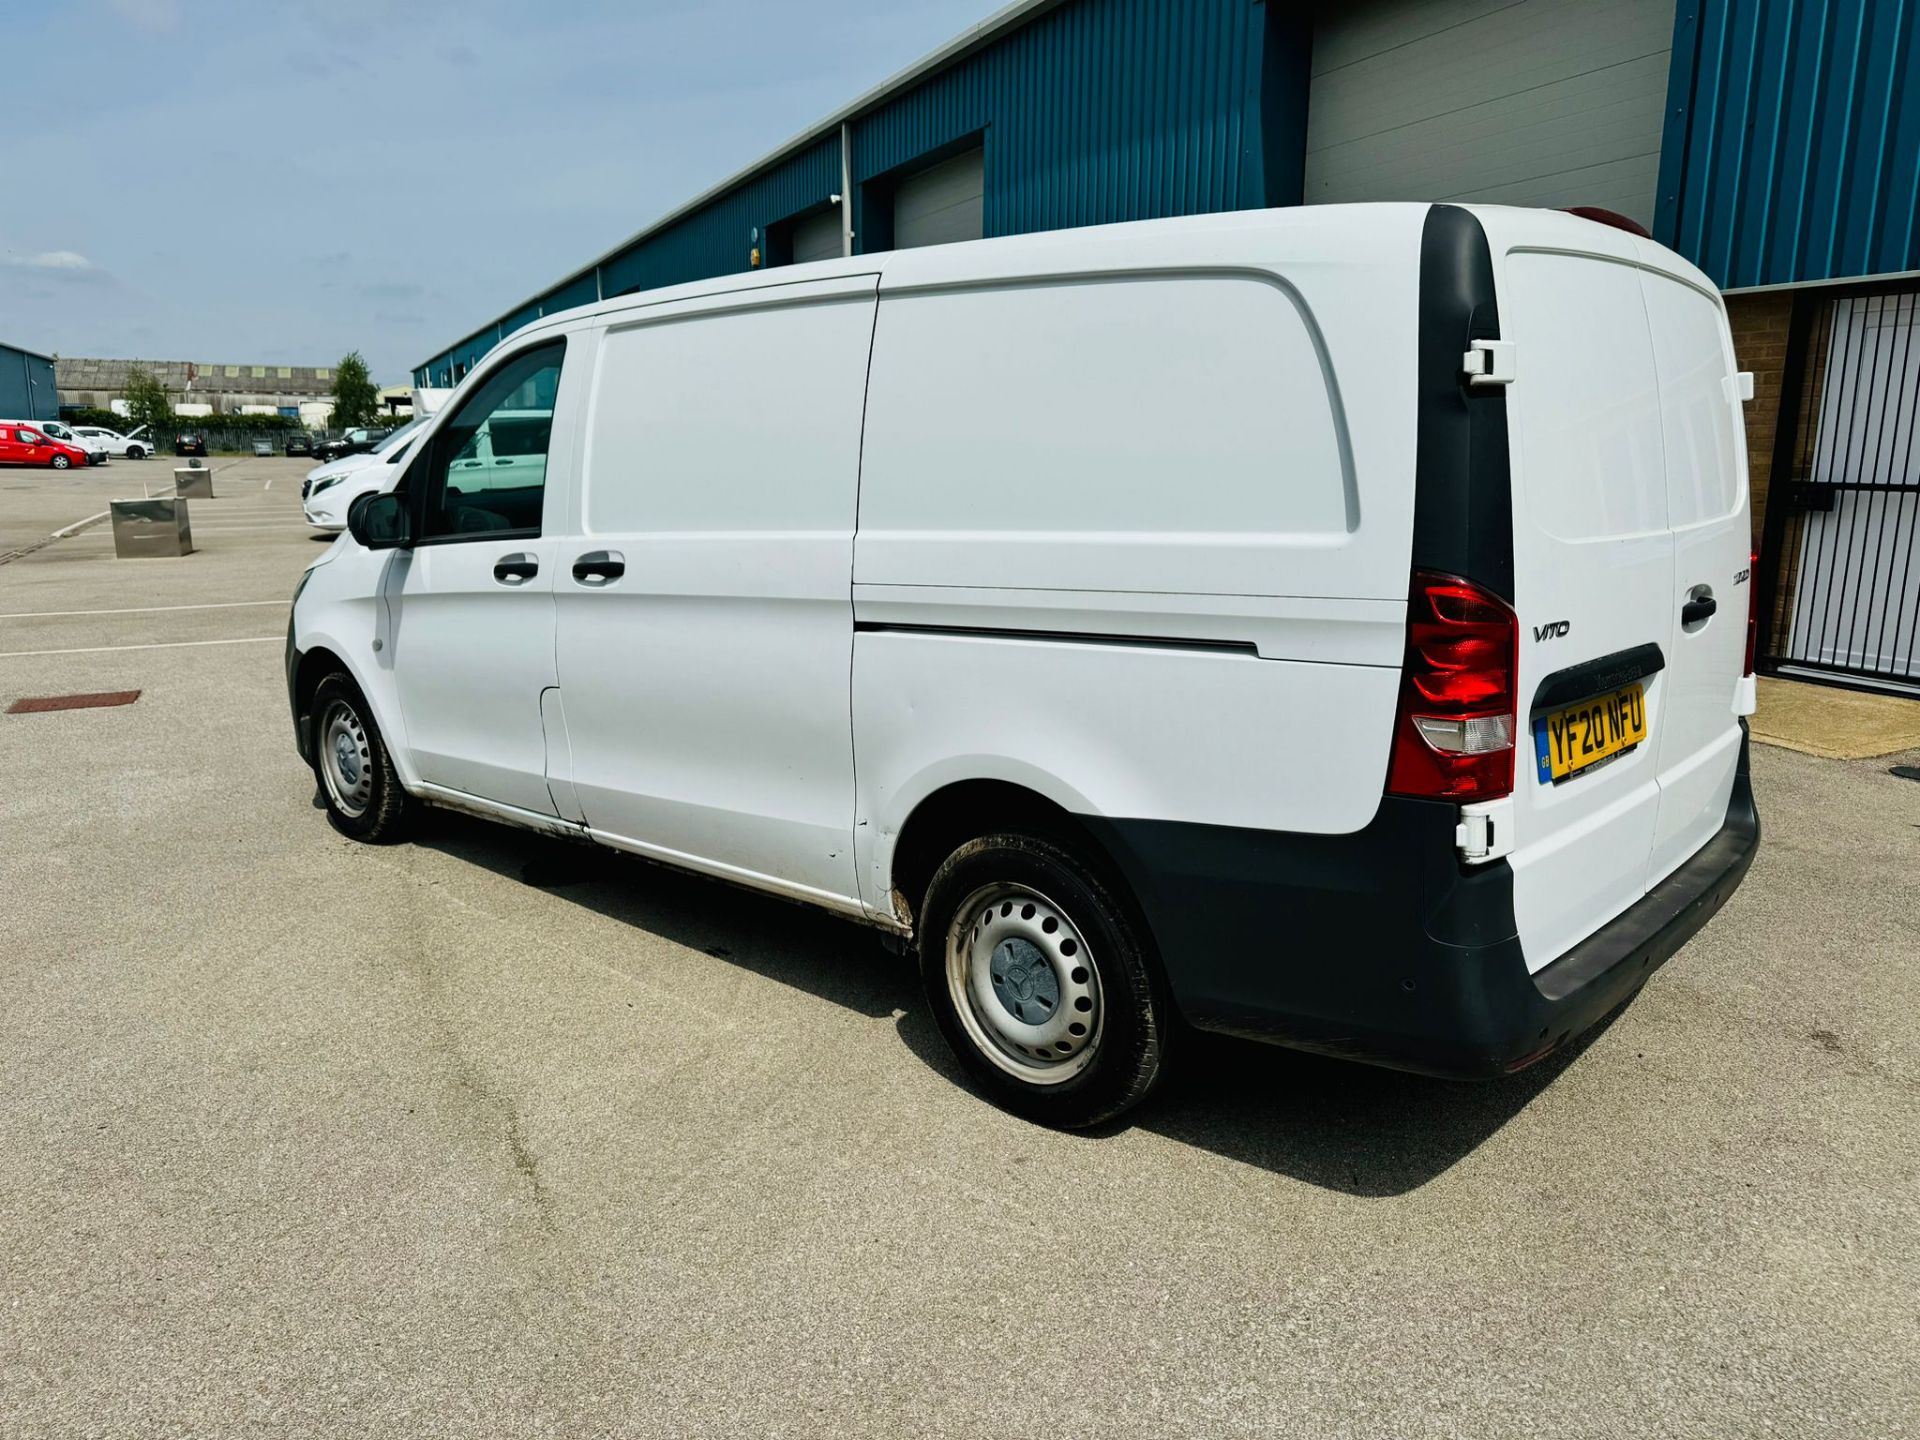 MERCEDES BENZ VITO CDI PURE - 2020 20 Reg - Only 74k Miles - 1 Owner From New - Parking Sensors - Image 3 of 21